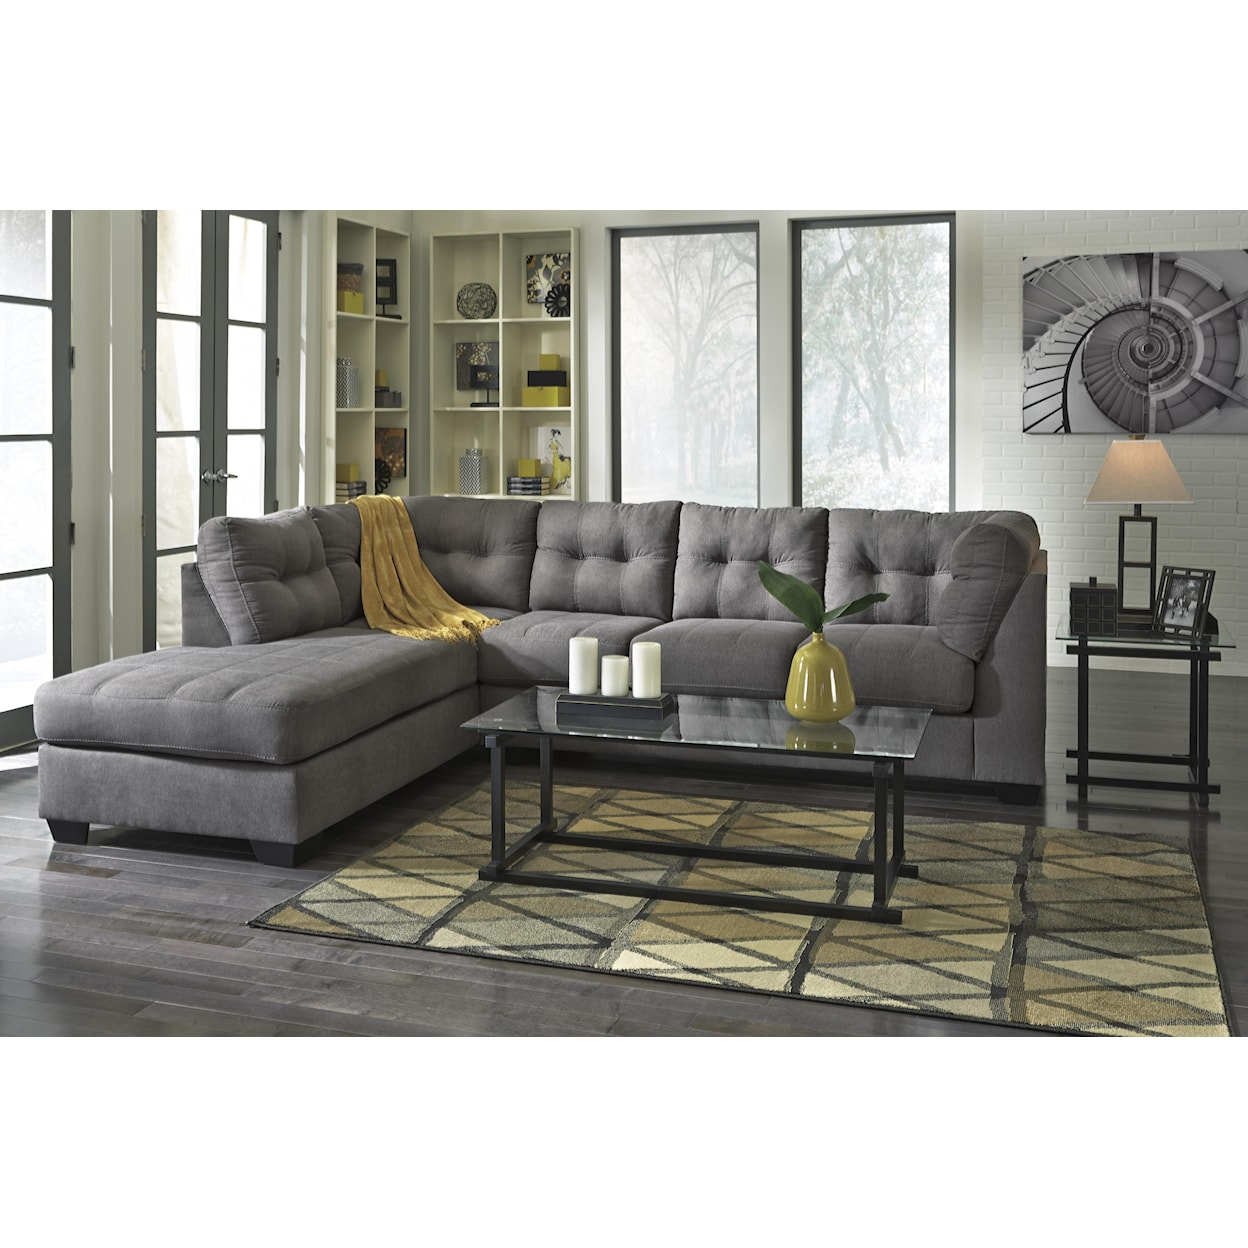 Benchcraft Maier - Charcoal 2-Piece Sectional with Left Chaise